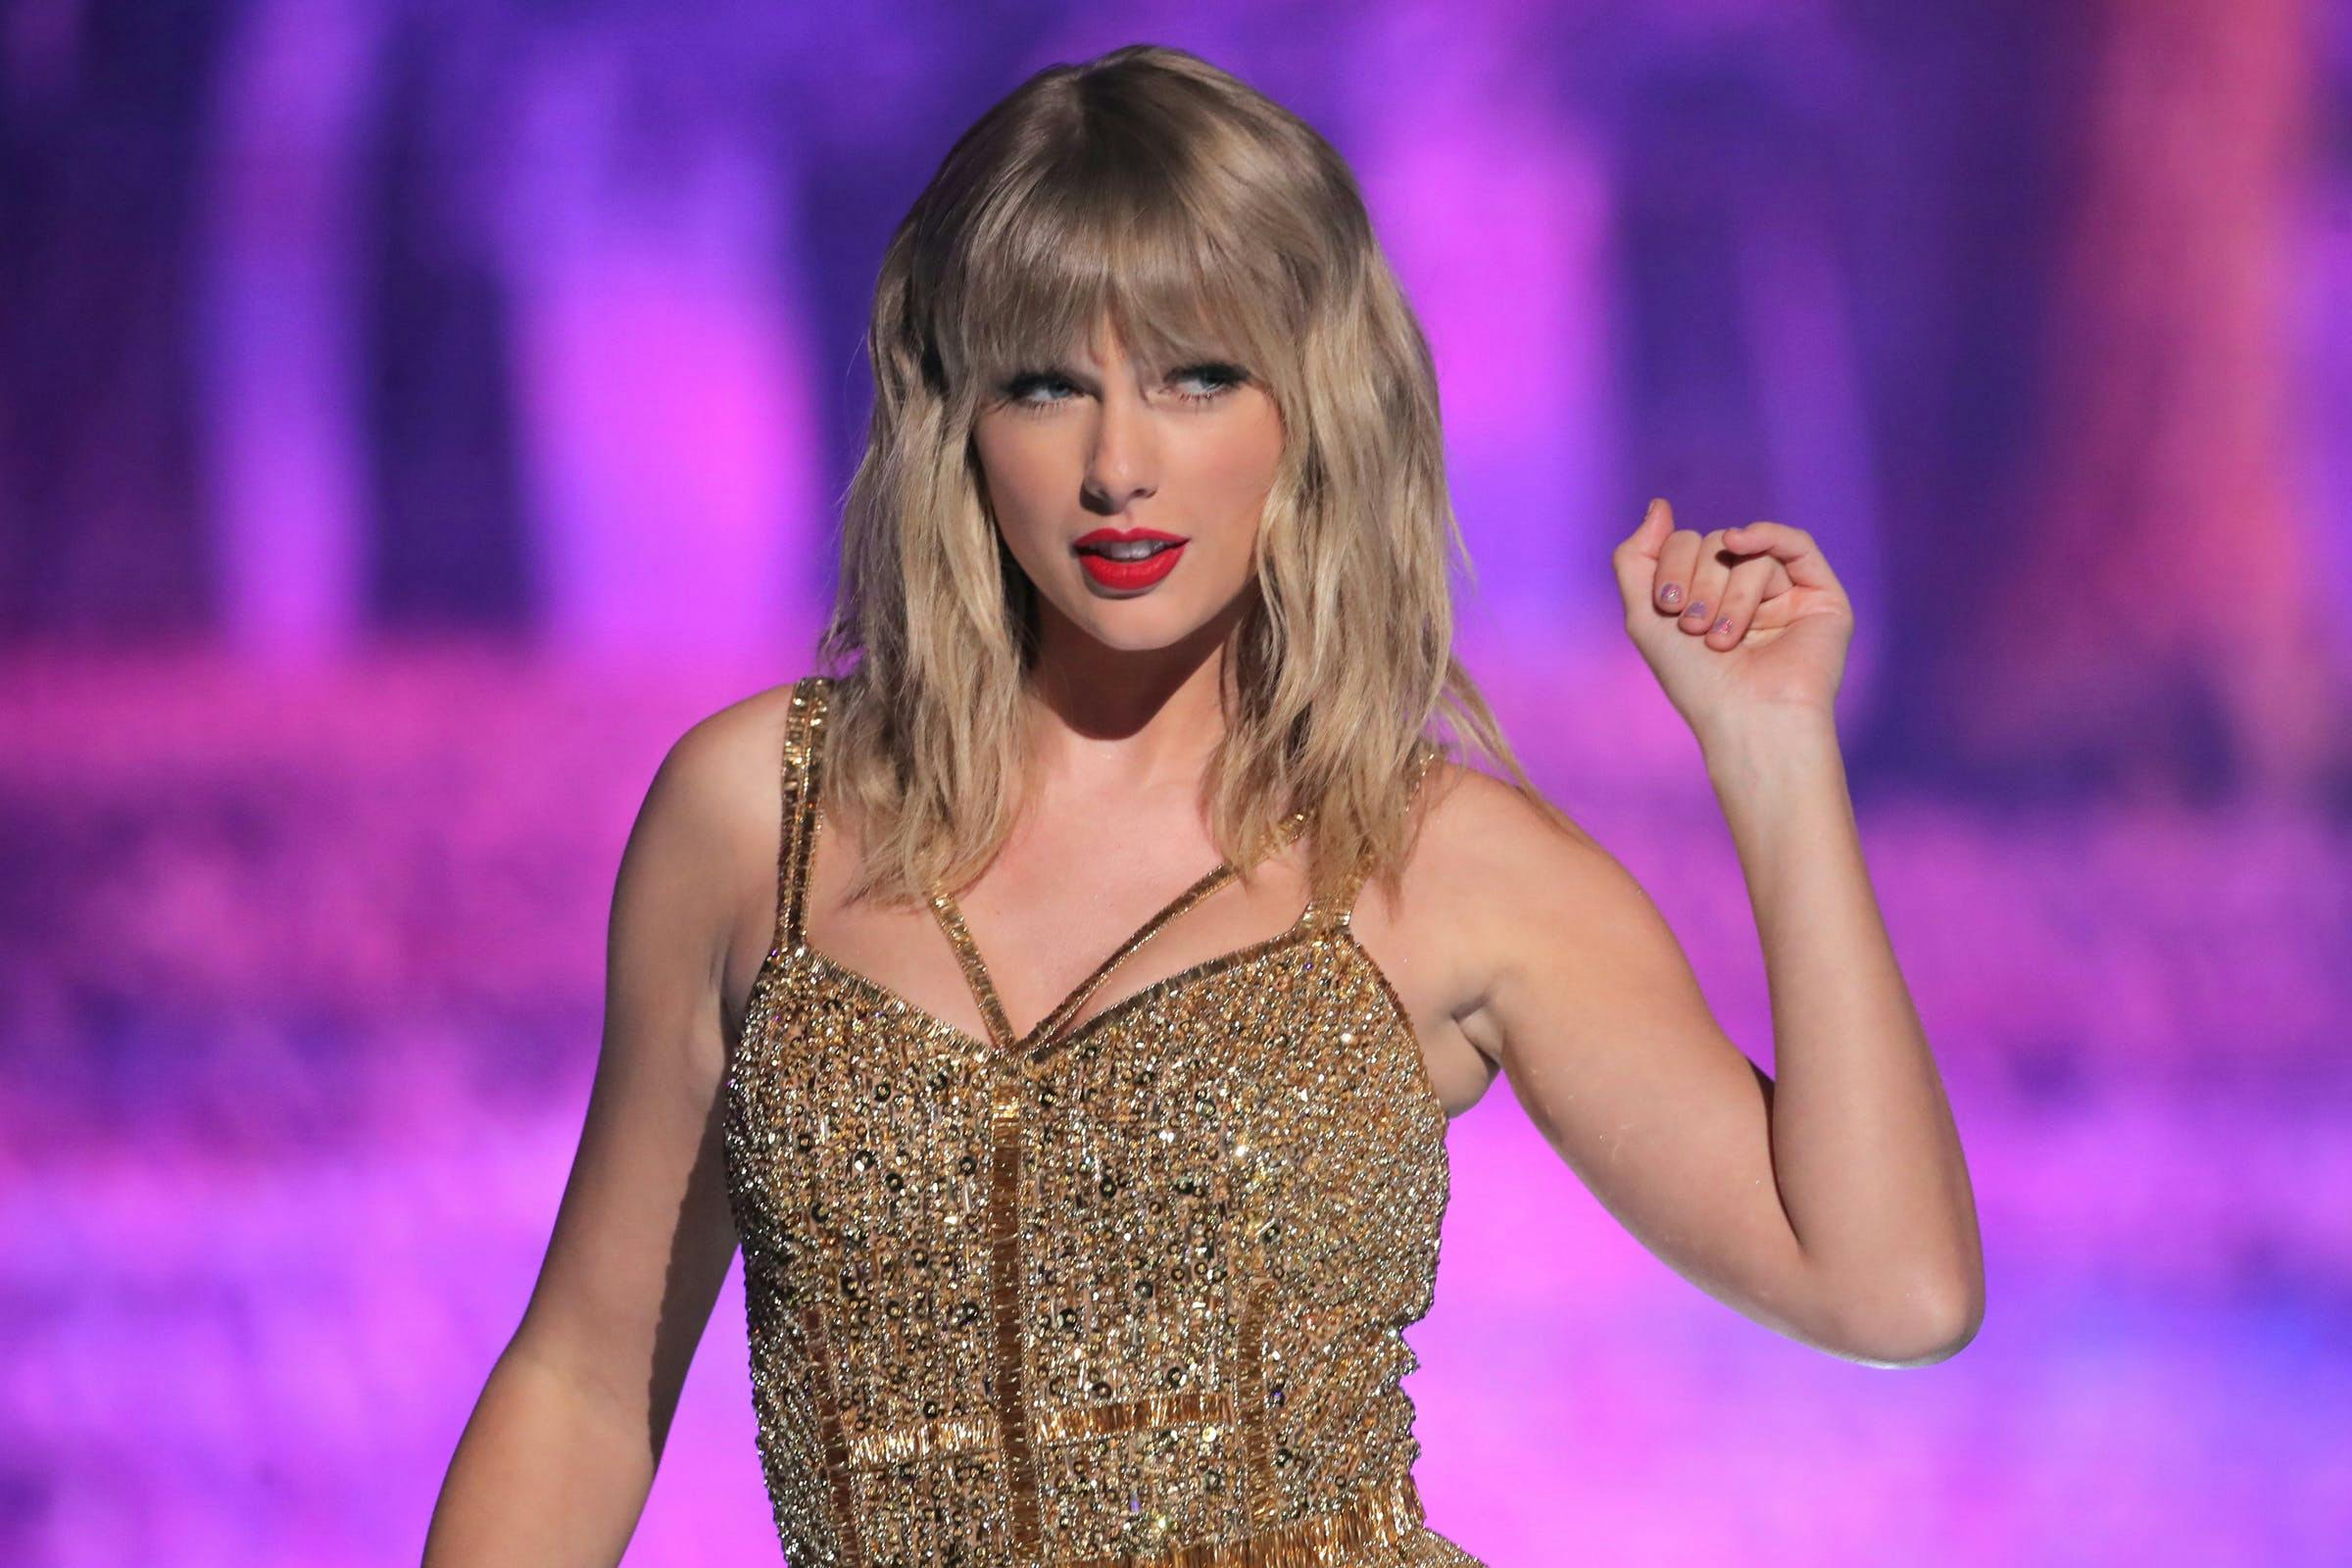 47th annual american music awards show microsoft theater los angeles usa 24 nov 2019 taylor swift amas alone female performing personality 85575667 dress finger person evening dress formal wear fashion adult woman solo performance